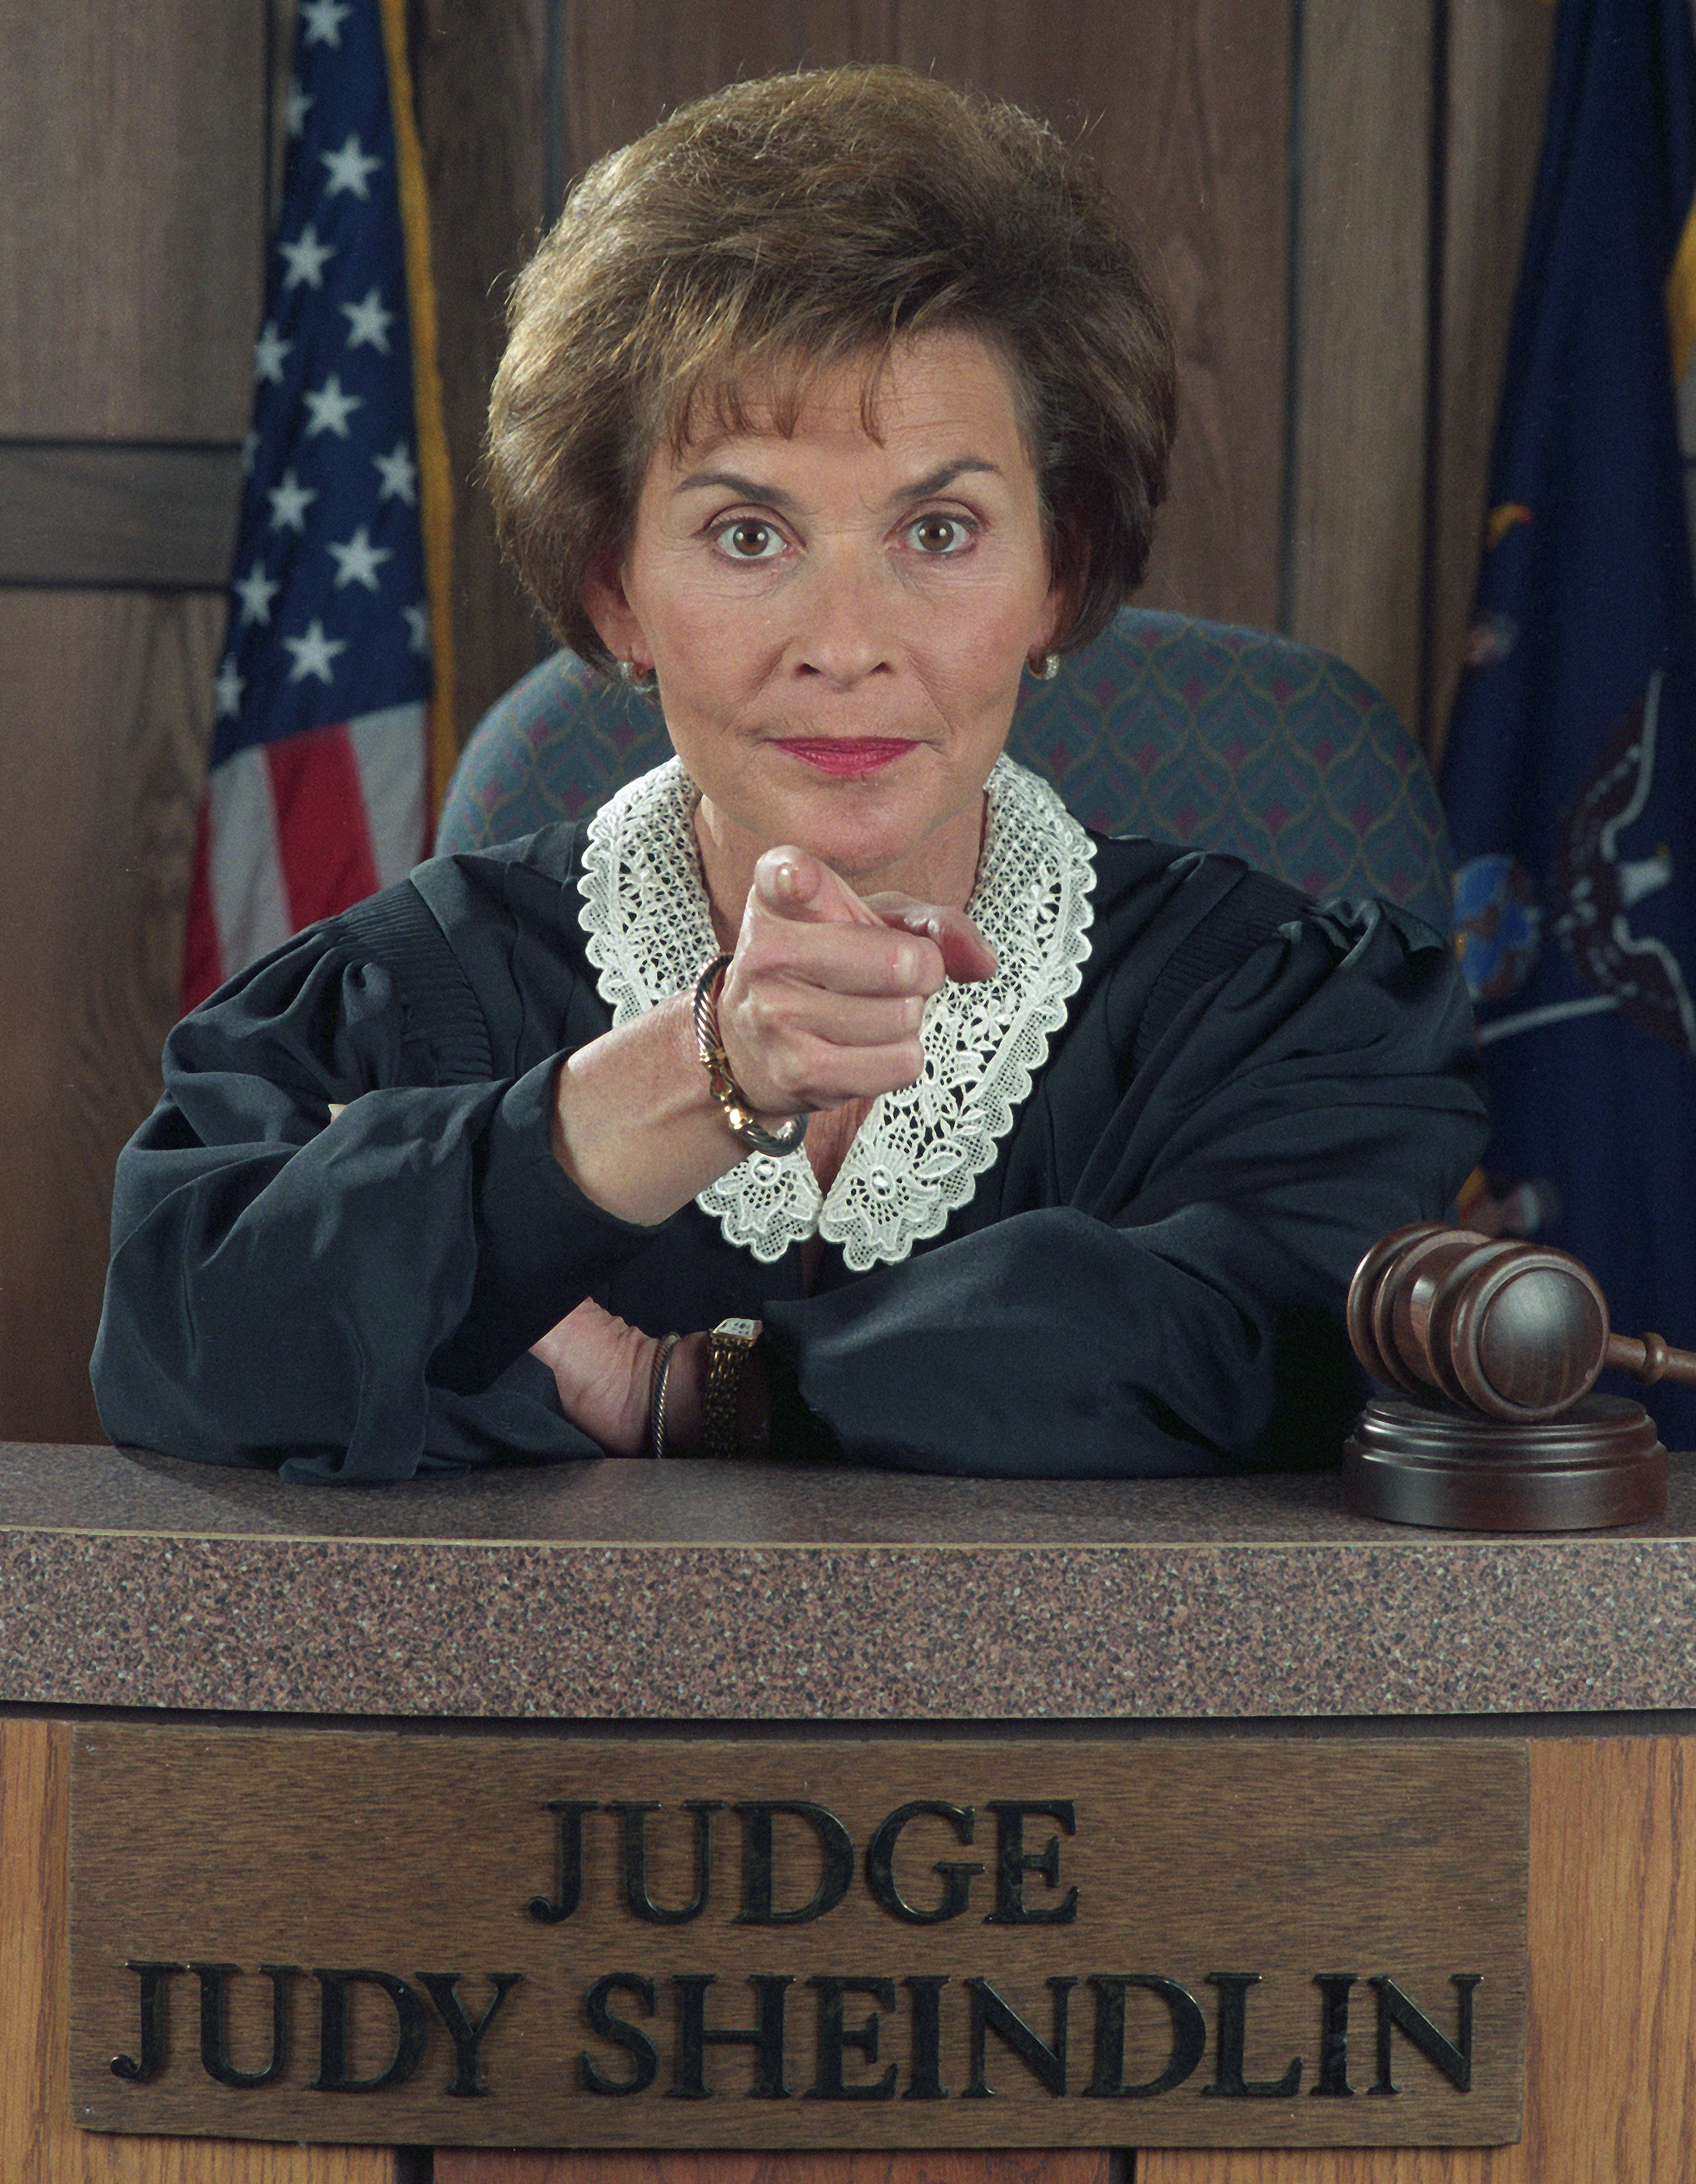 Judge Judy Sheindlin on the set of her television show in Los Angeles, California, on December 2, 1997 | Source: Getty Images